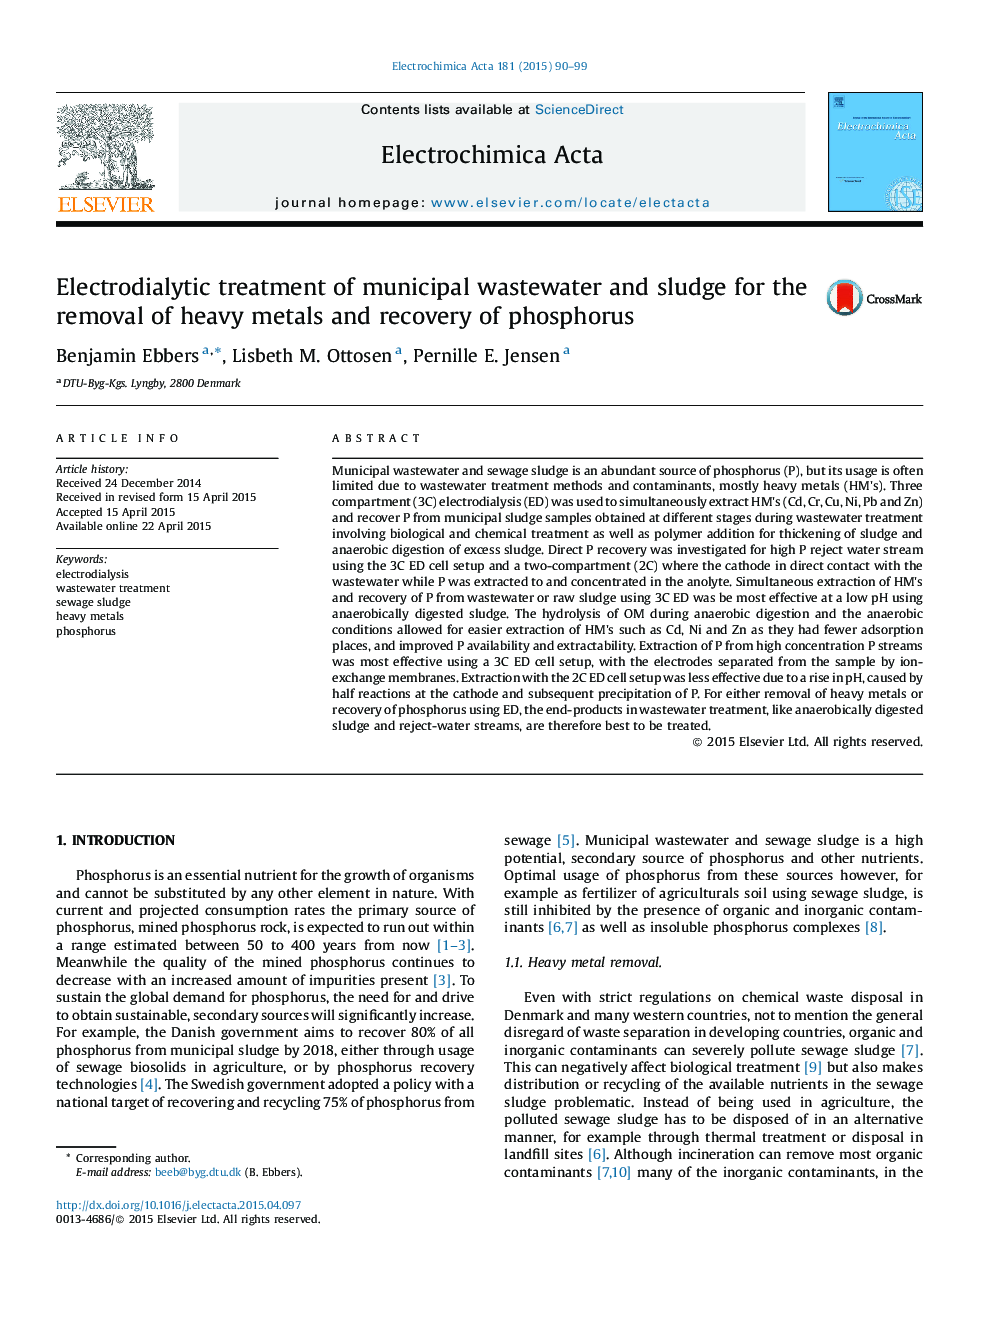 Electrodialytic treatment of municipal wastewater and sludge for the removal of heavy metals and recovery of phosphorus